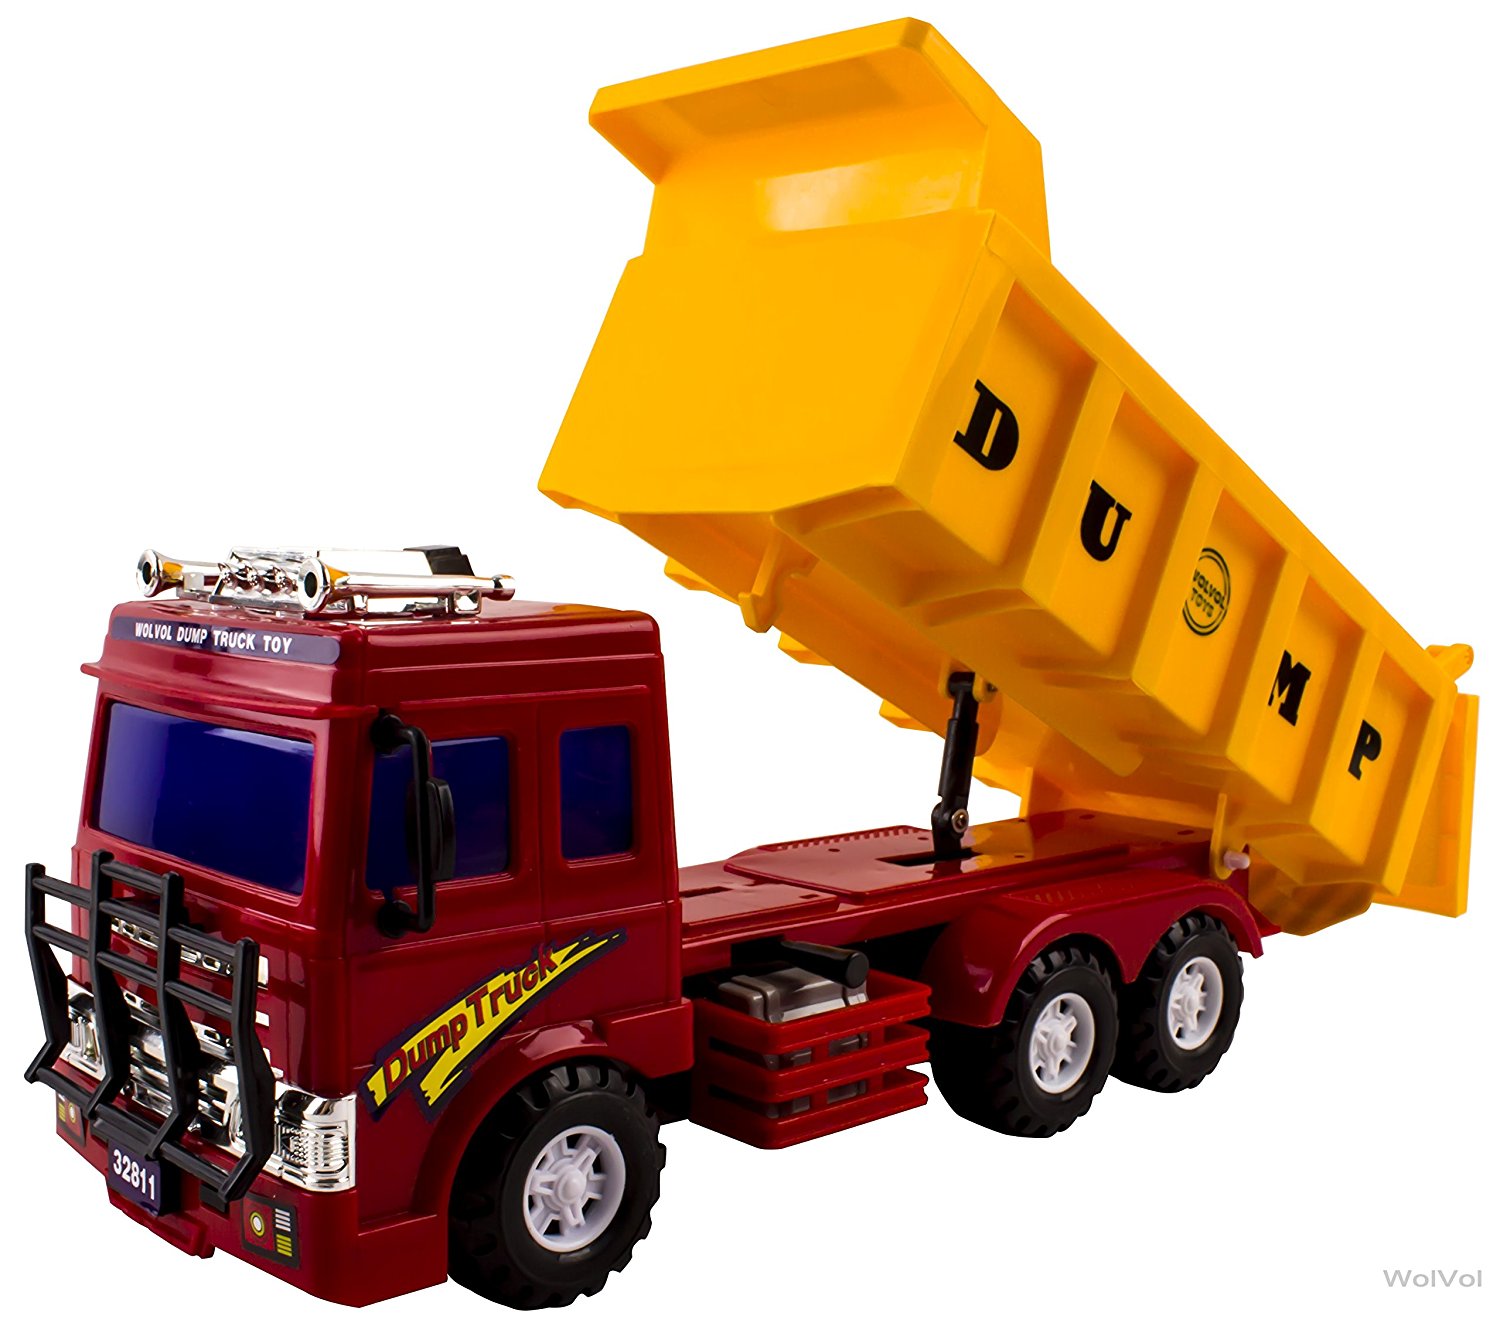 Amazon.com: WolVol Big Dump Truck Toy for Kids with Friction Power ...